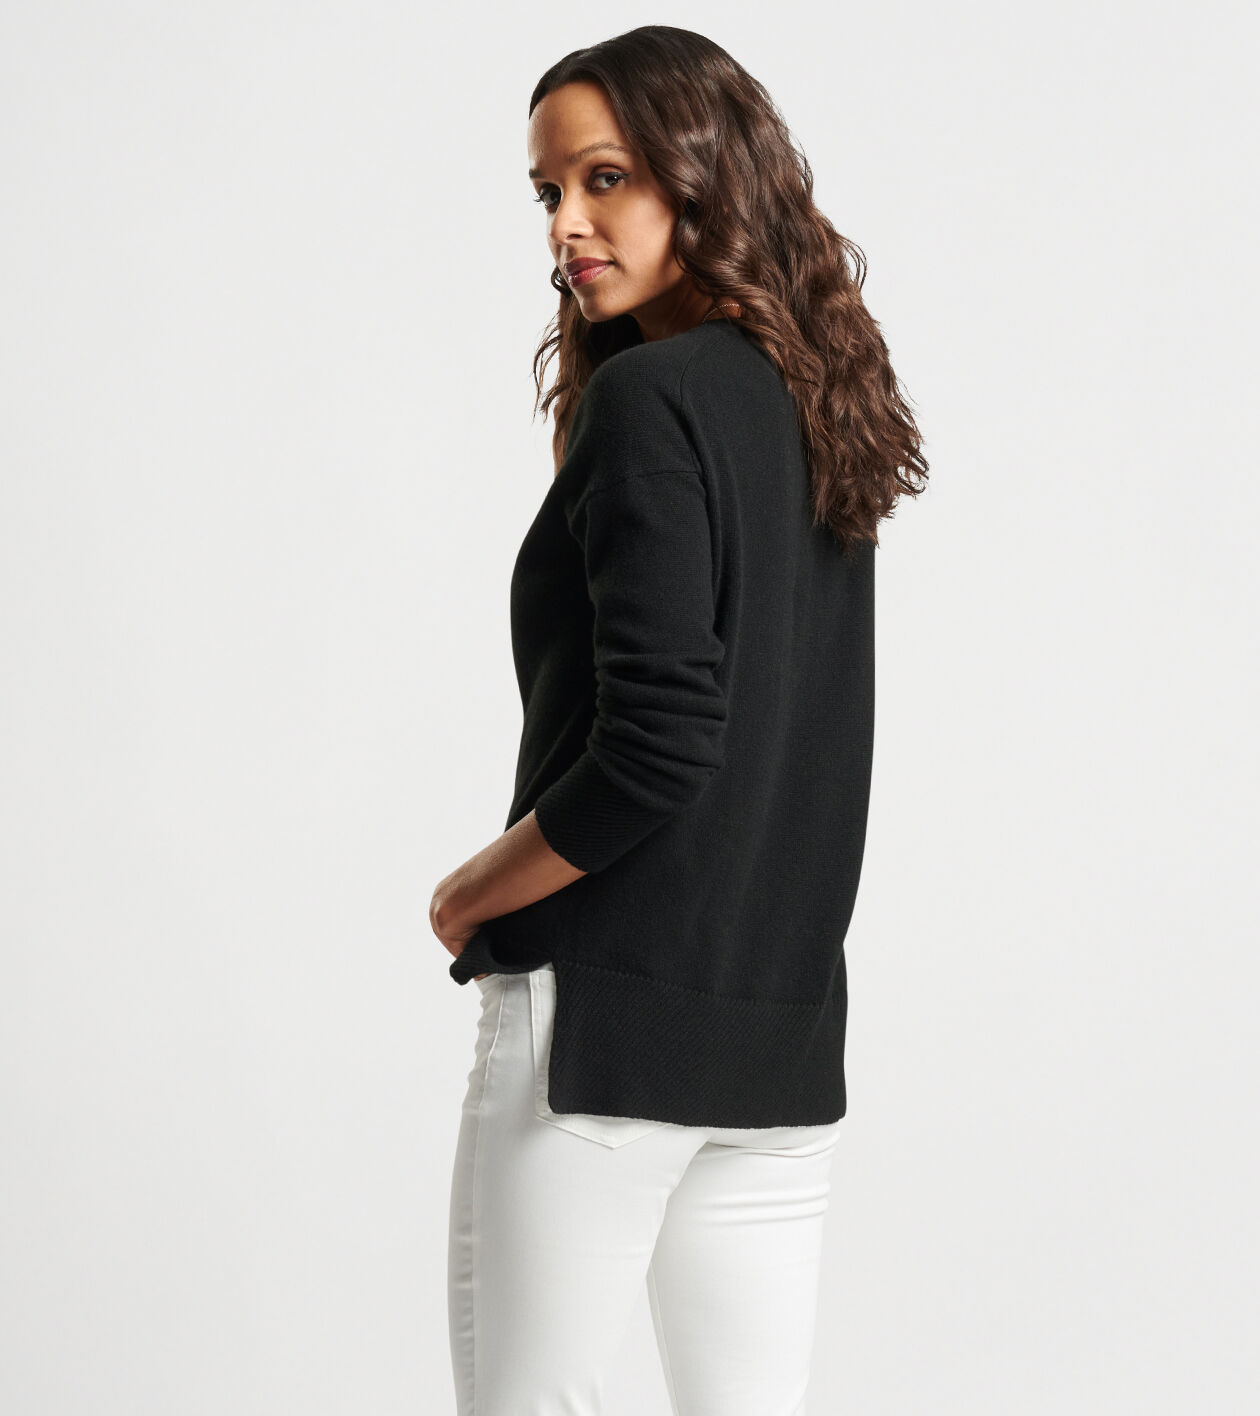 Artisan Crafted Cashmere V-Neck Sweater